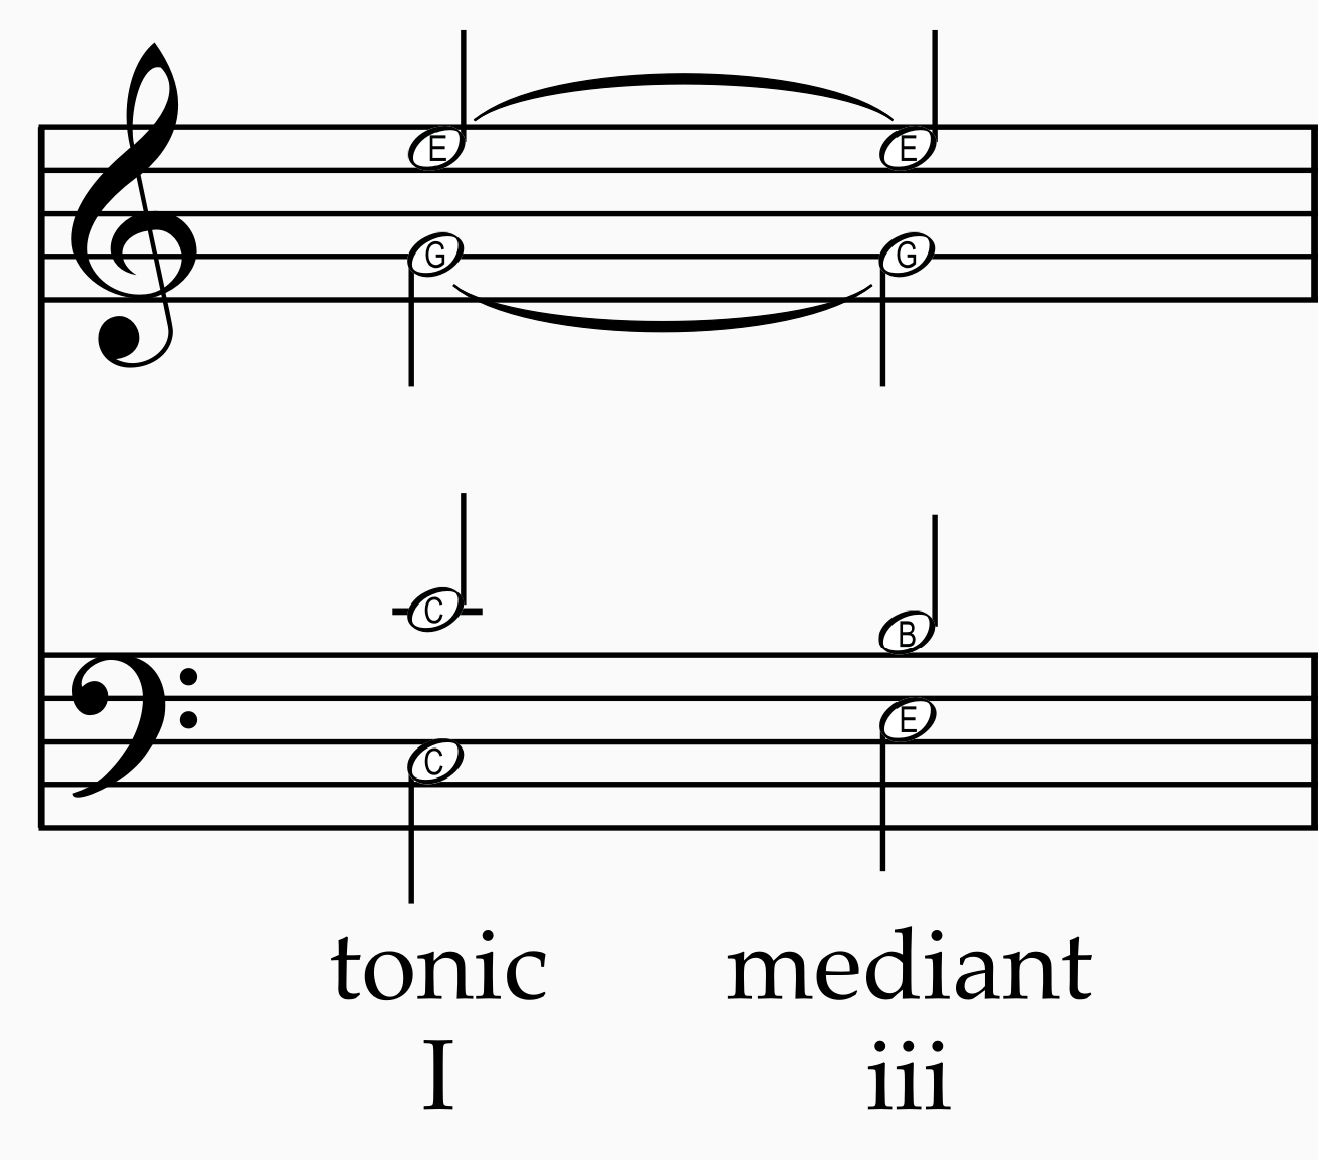 Figure 10. Always try to find the common tones between connecting chords and sustain them, which means keep them in the same voice that they are in. The voices are referred to as Soprano, Alto, Tenor, and Bass (from top to bottom), usually abbreviat…